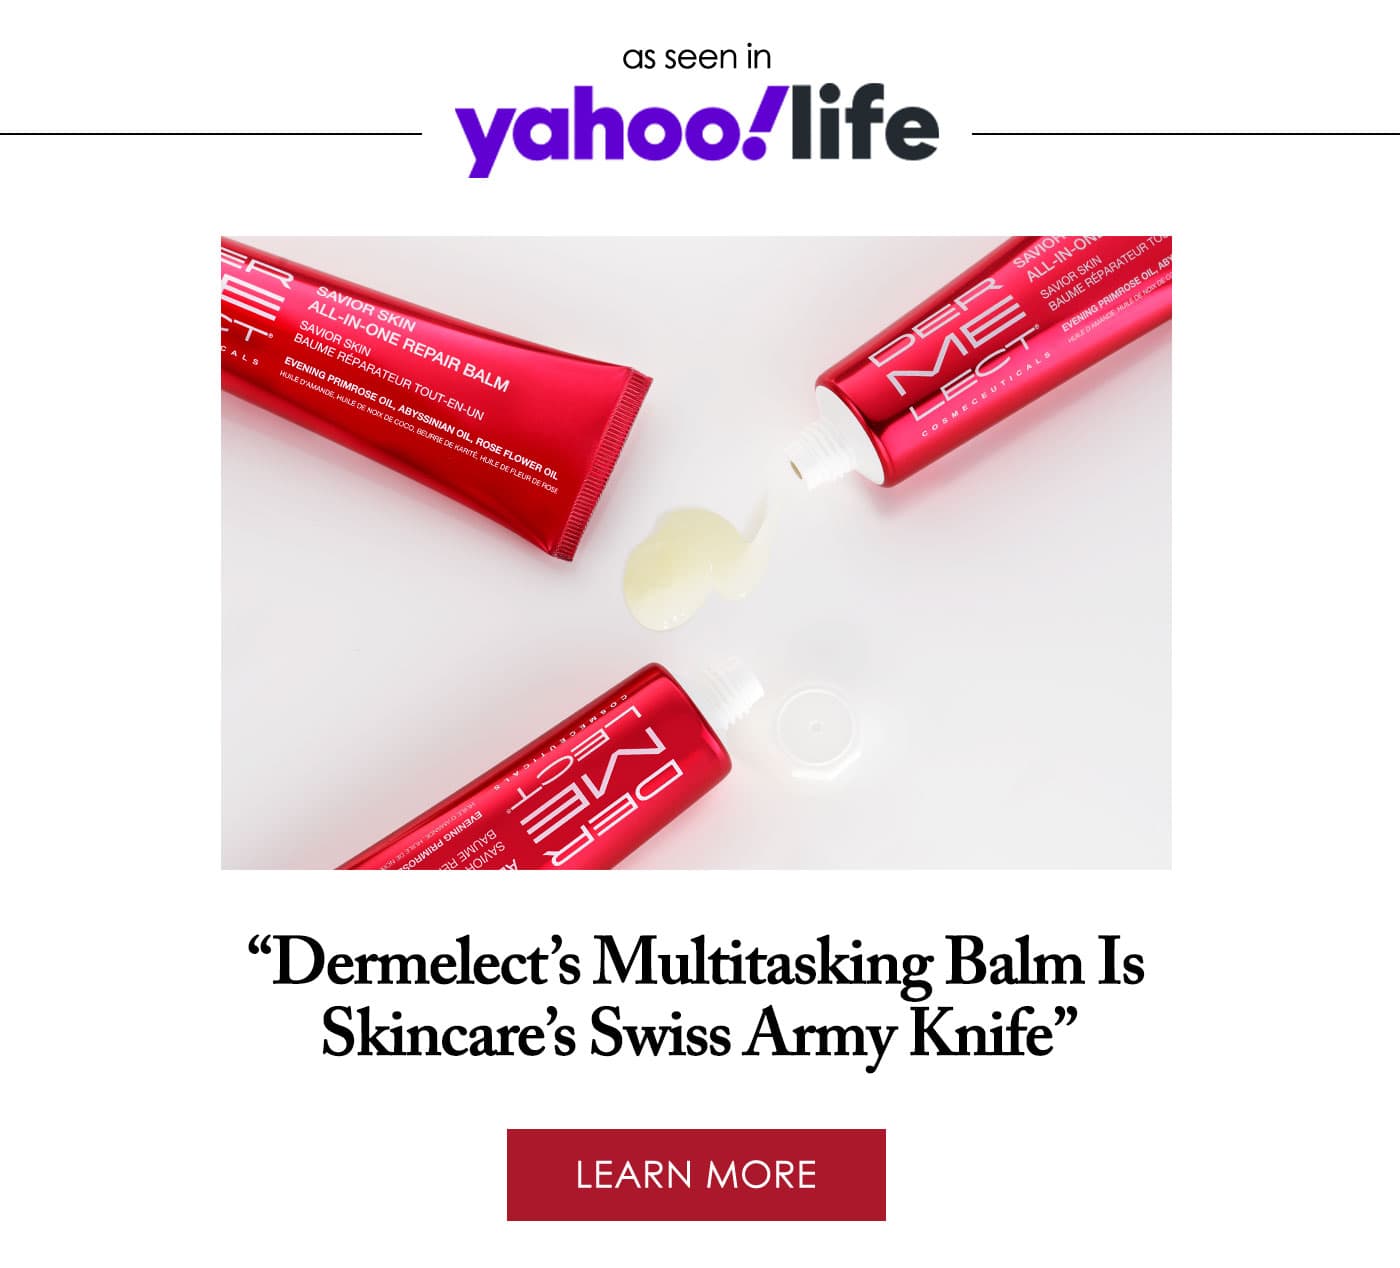 Dermelect’s Multitasking Balm Is Skincare’s Swiss Army Knife